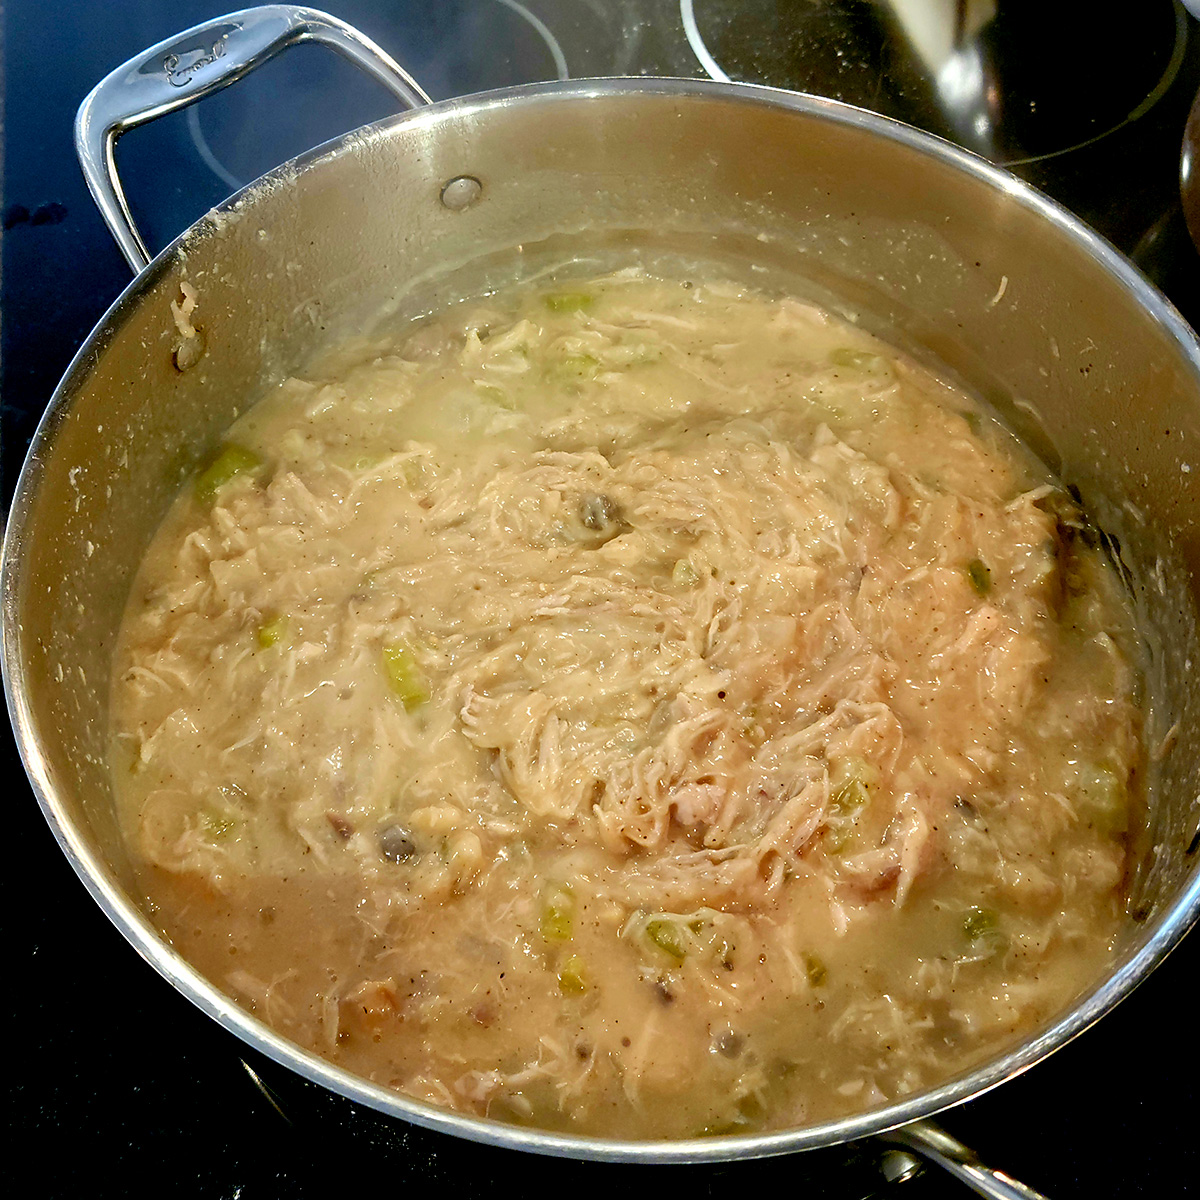 Chicken jallop after simmering for one hour.